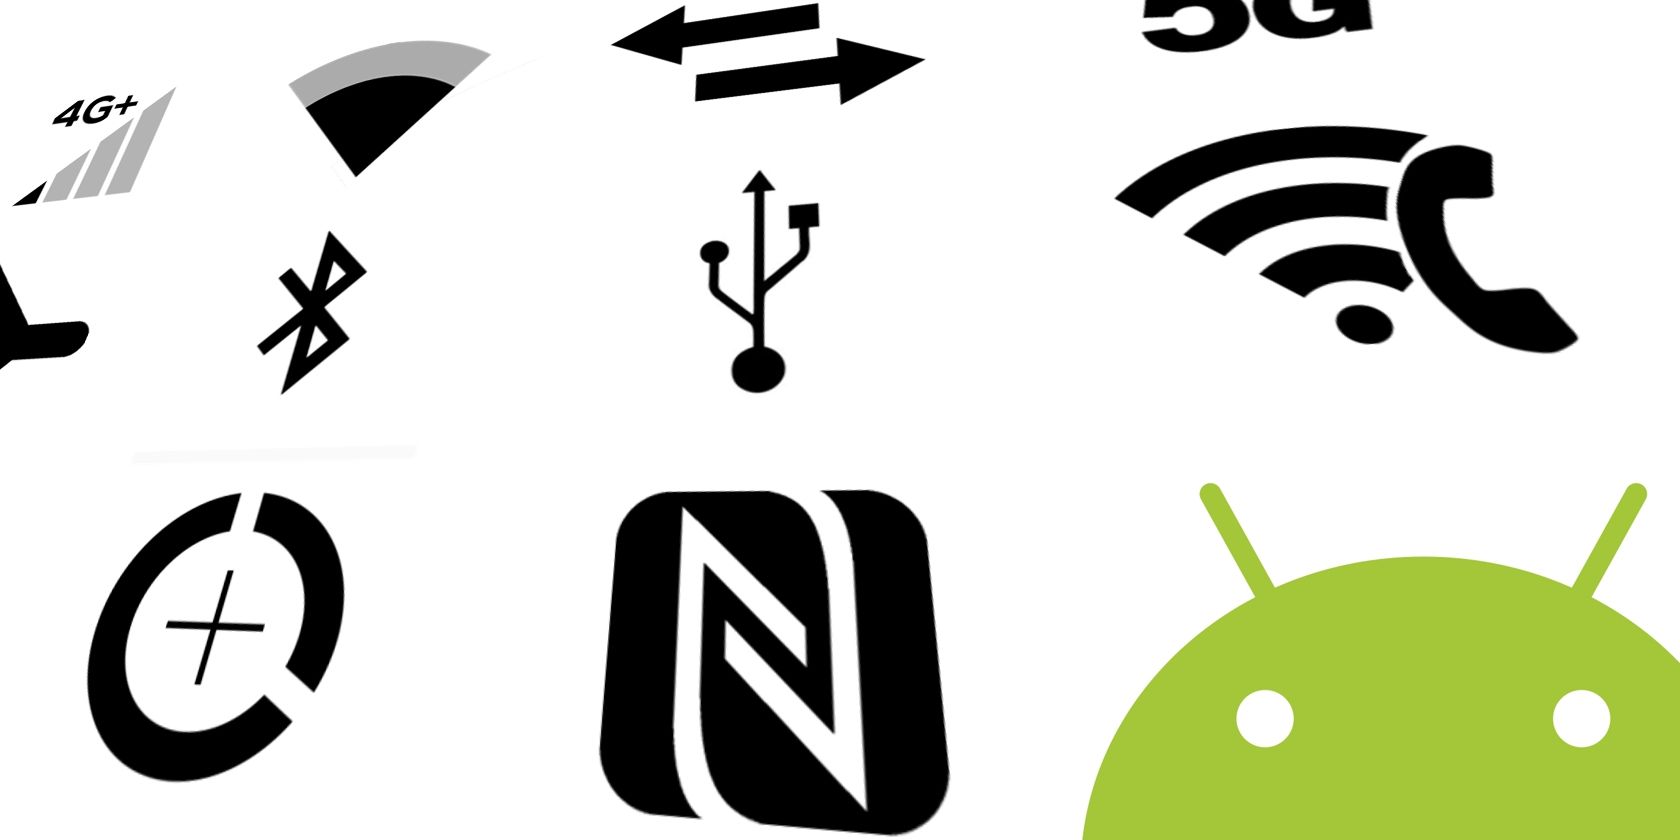 android icons meaning